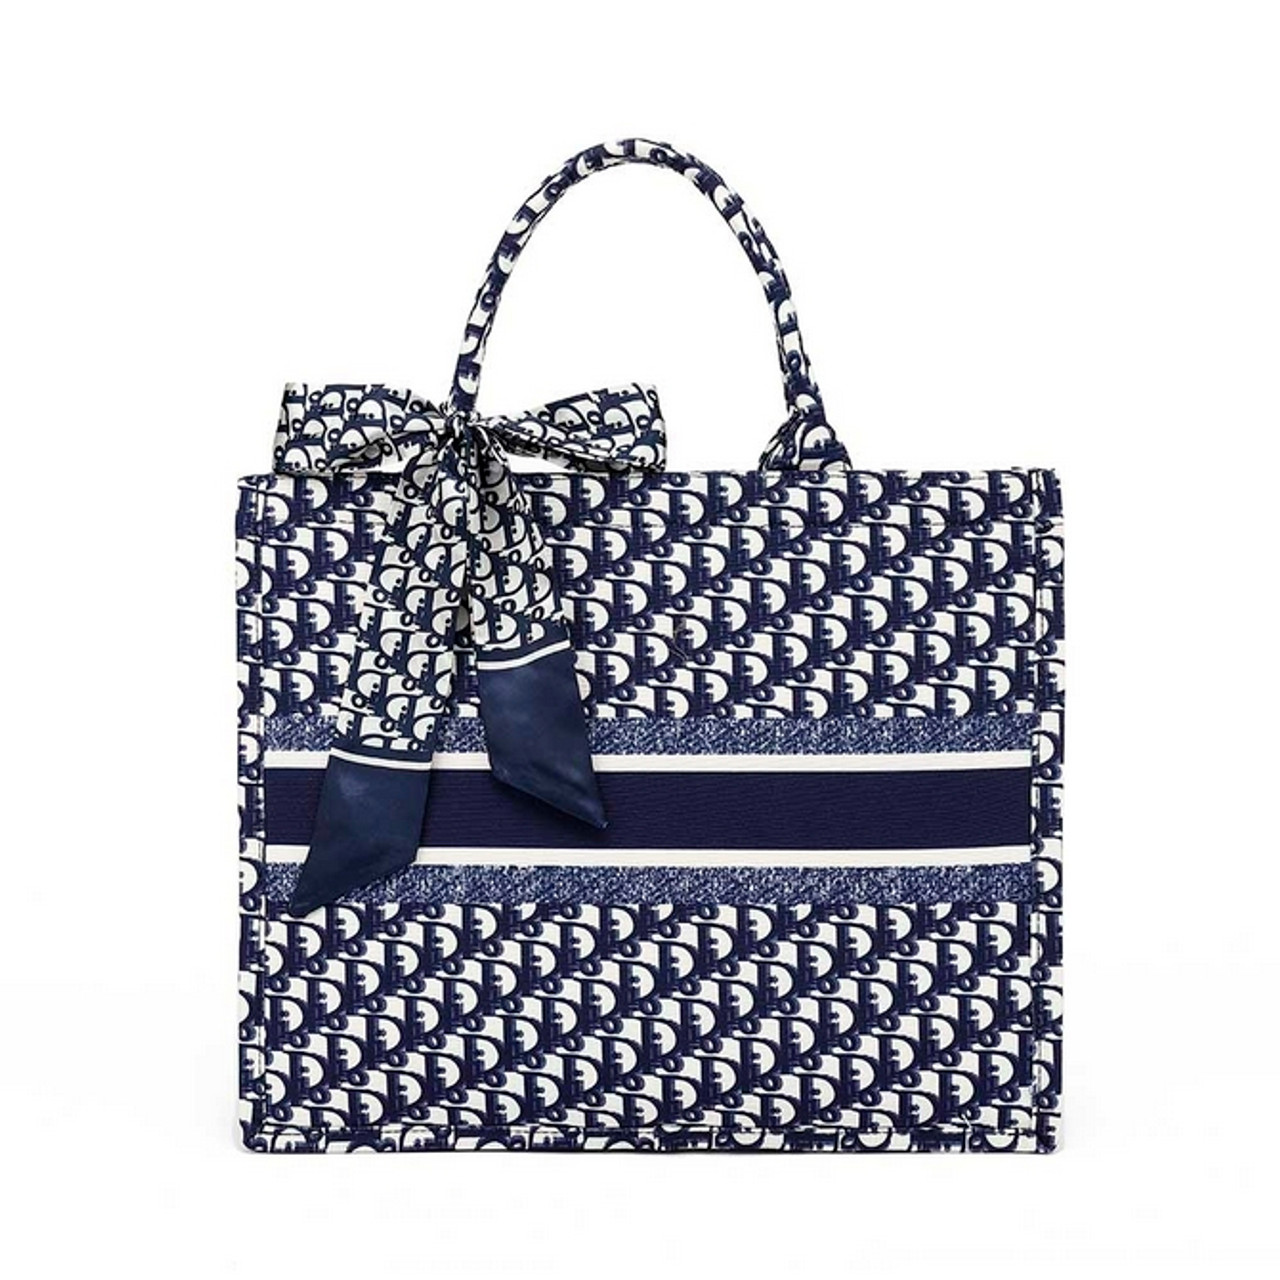 Book Tote Designer Inspired Bag with Scarf - Navy (Large)